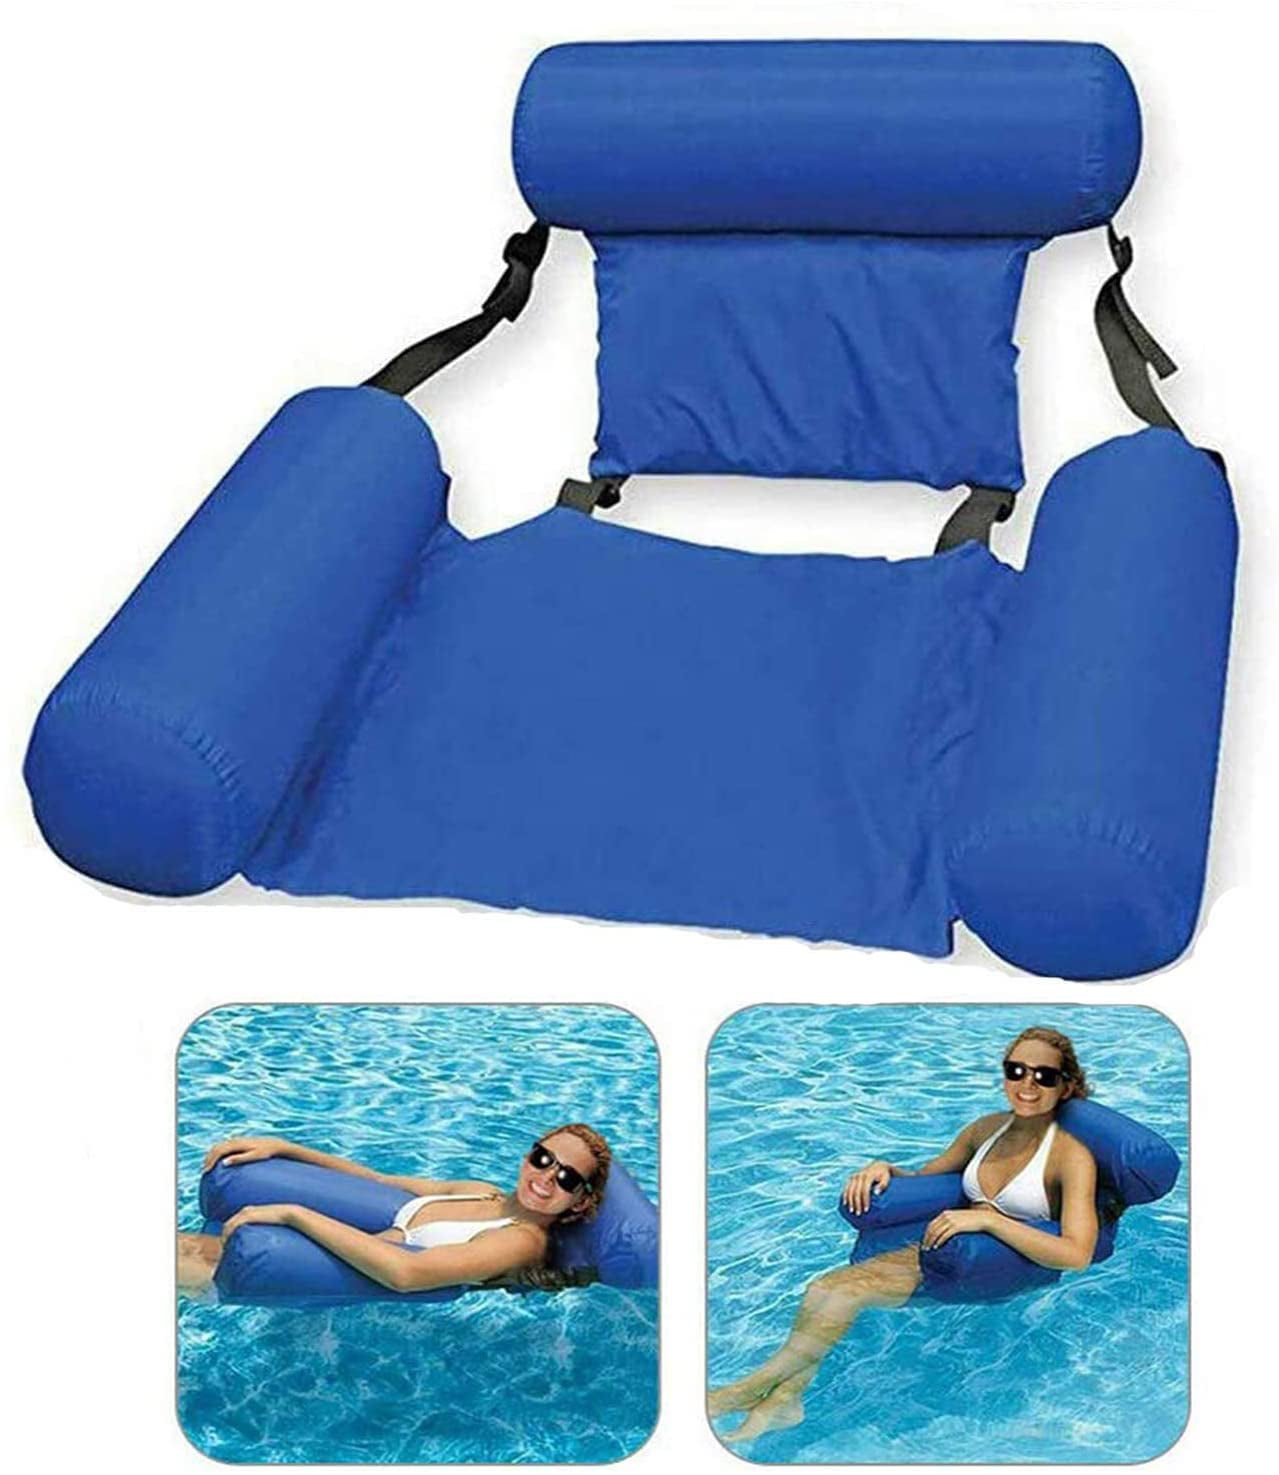 Inflatable Ride On Swimming Pool Beach Toy Water Hammock Float Rider Air Bed New 